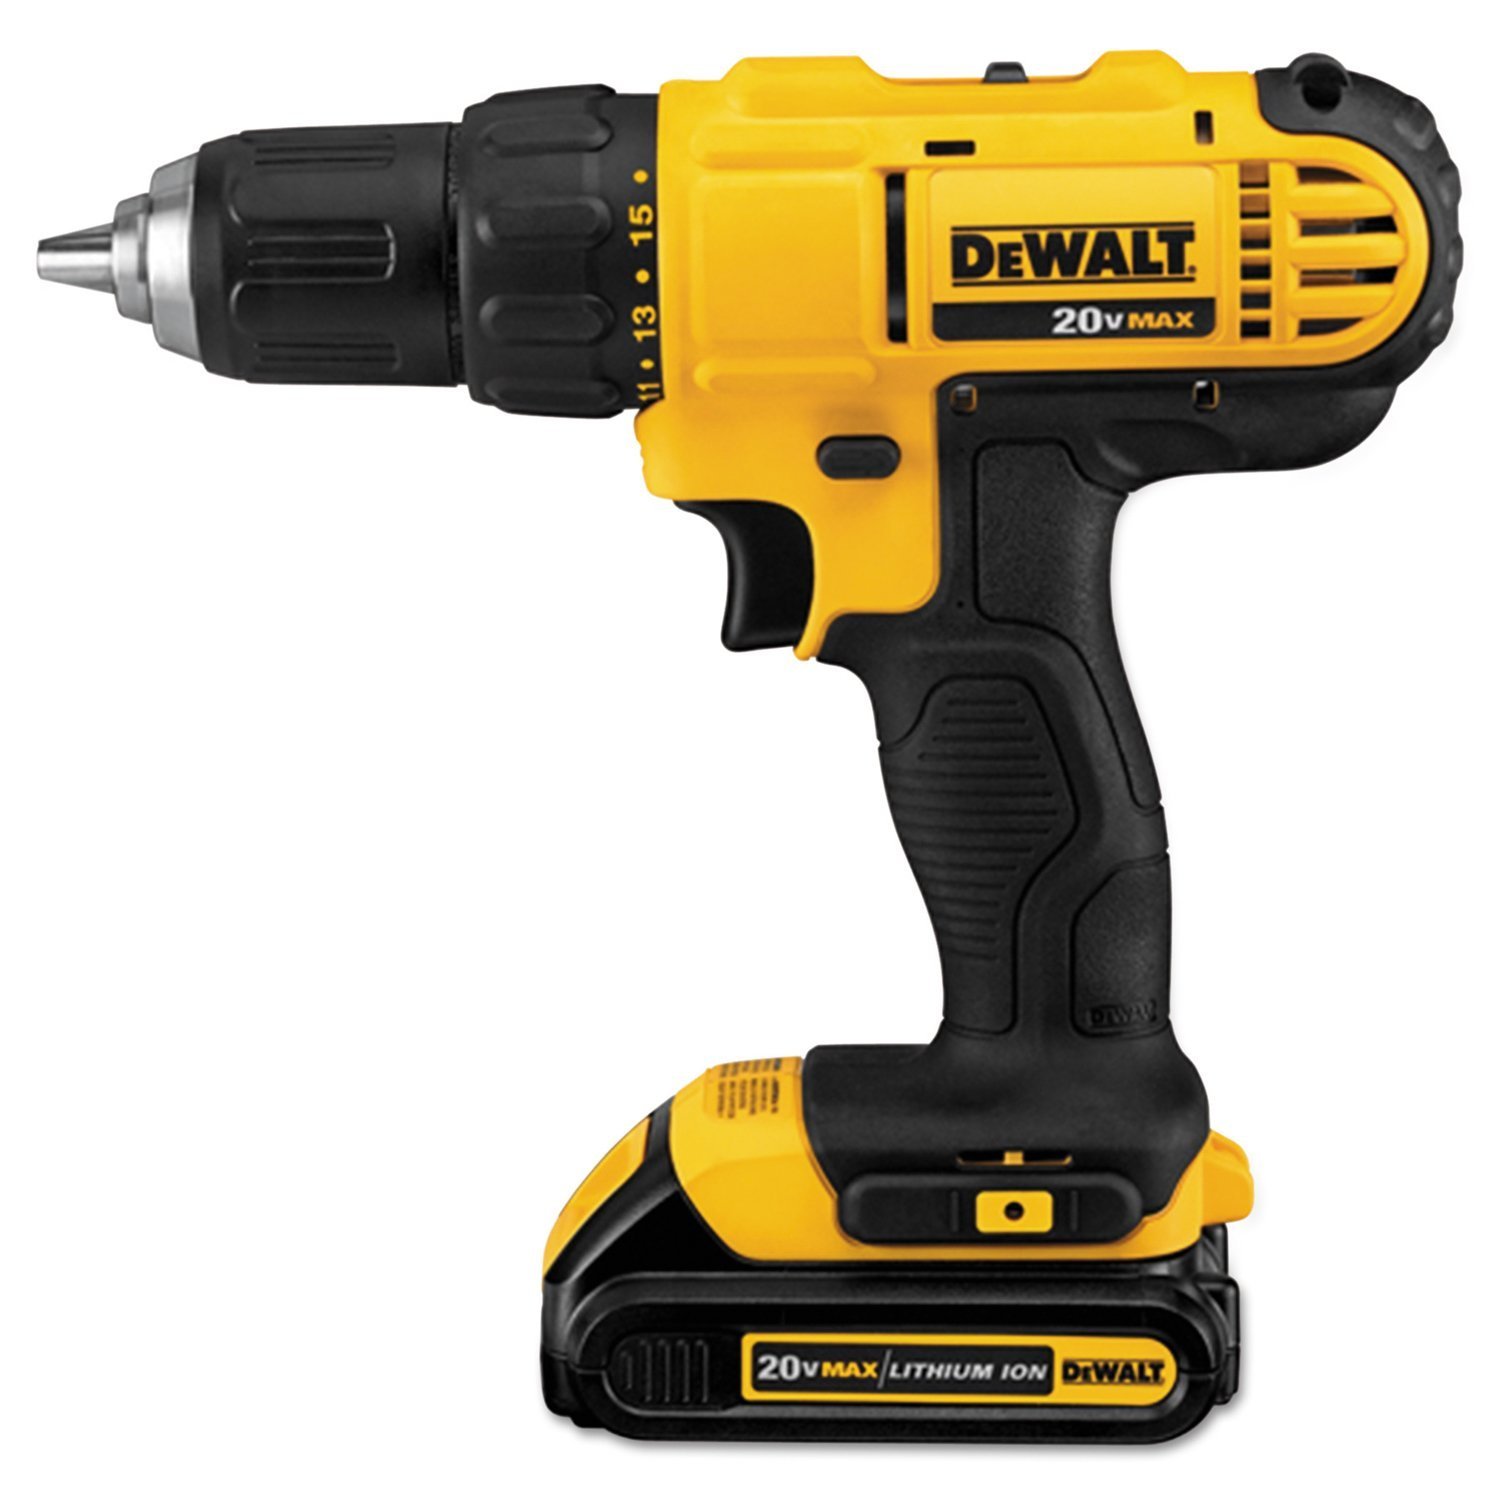 Dewalt DCD771C2 20V MAX Cordless Lithium-Ion 1/2 inch Compact Drill Driver Kit with IMPACT READY FlexTorq Screw Driving Set, 40-Piece